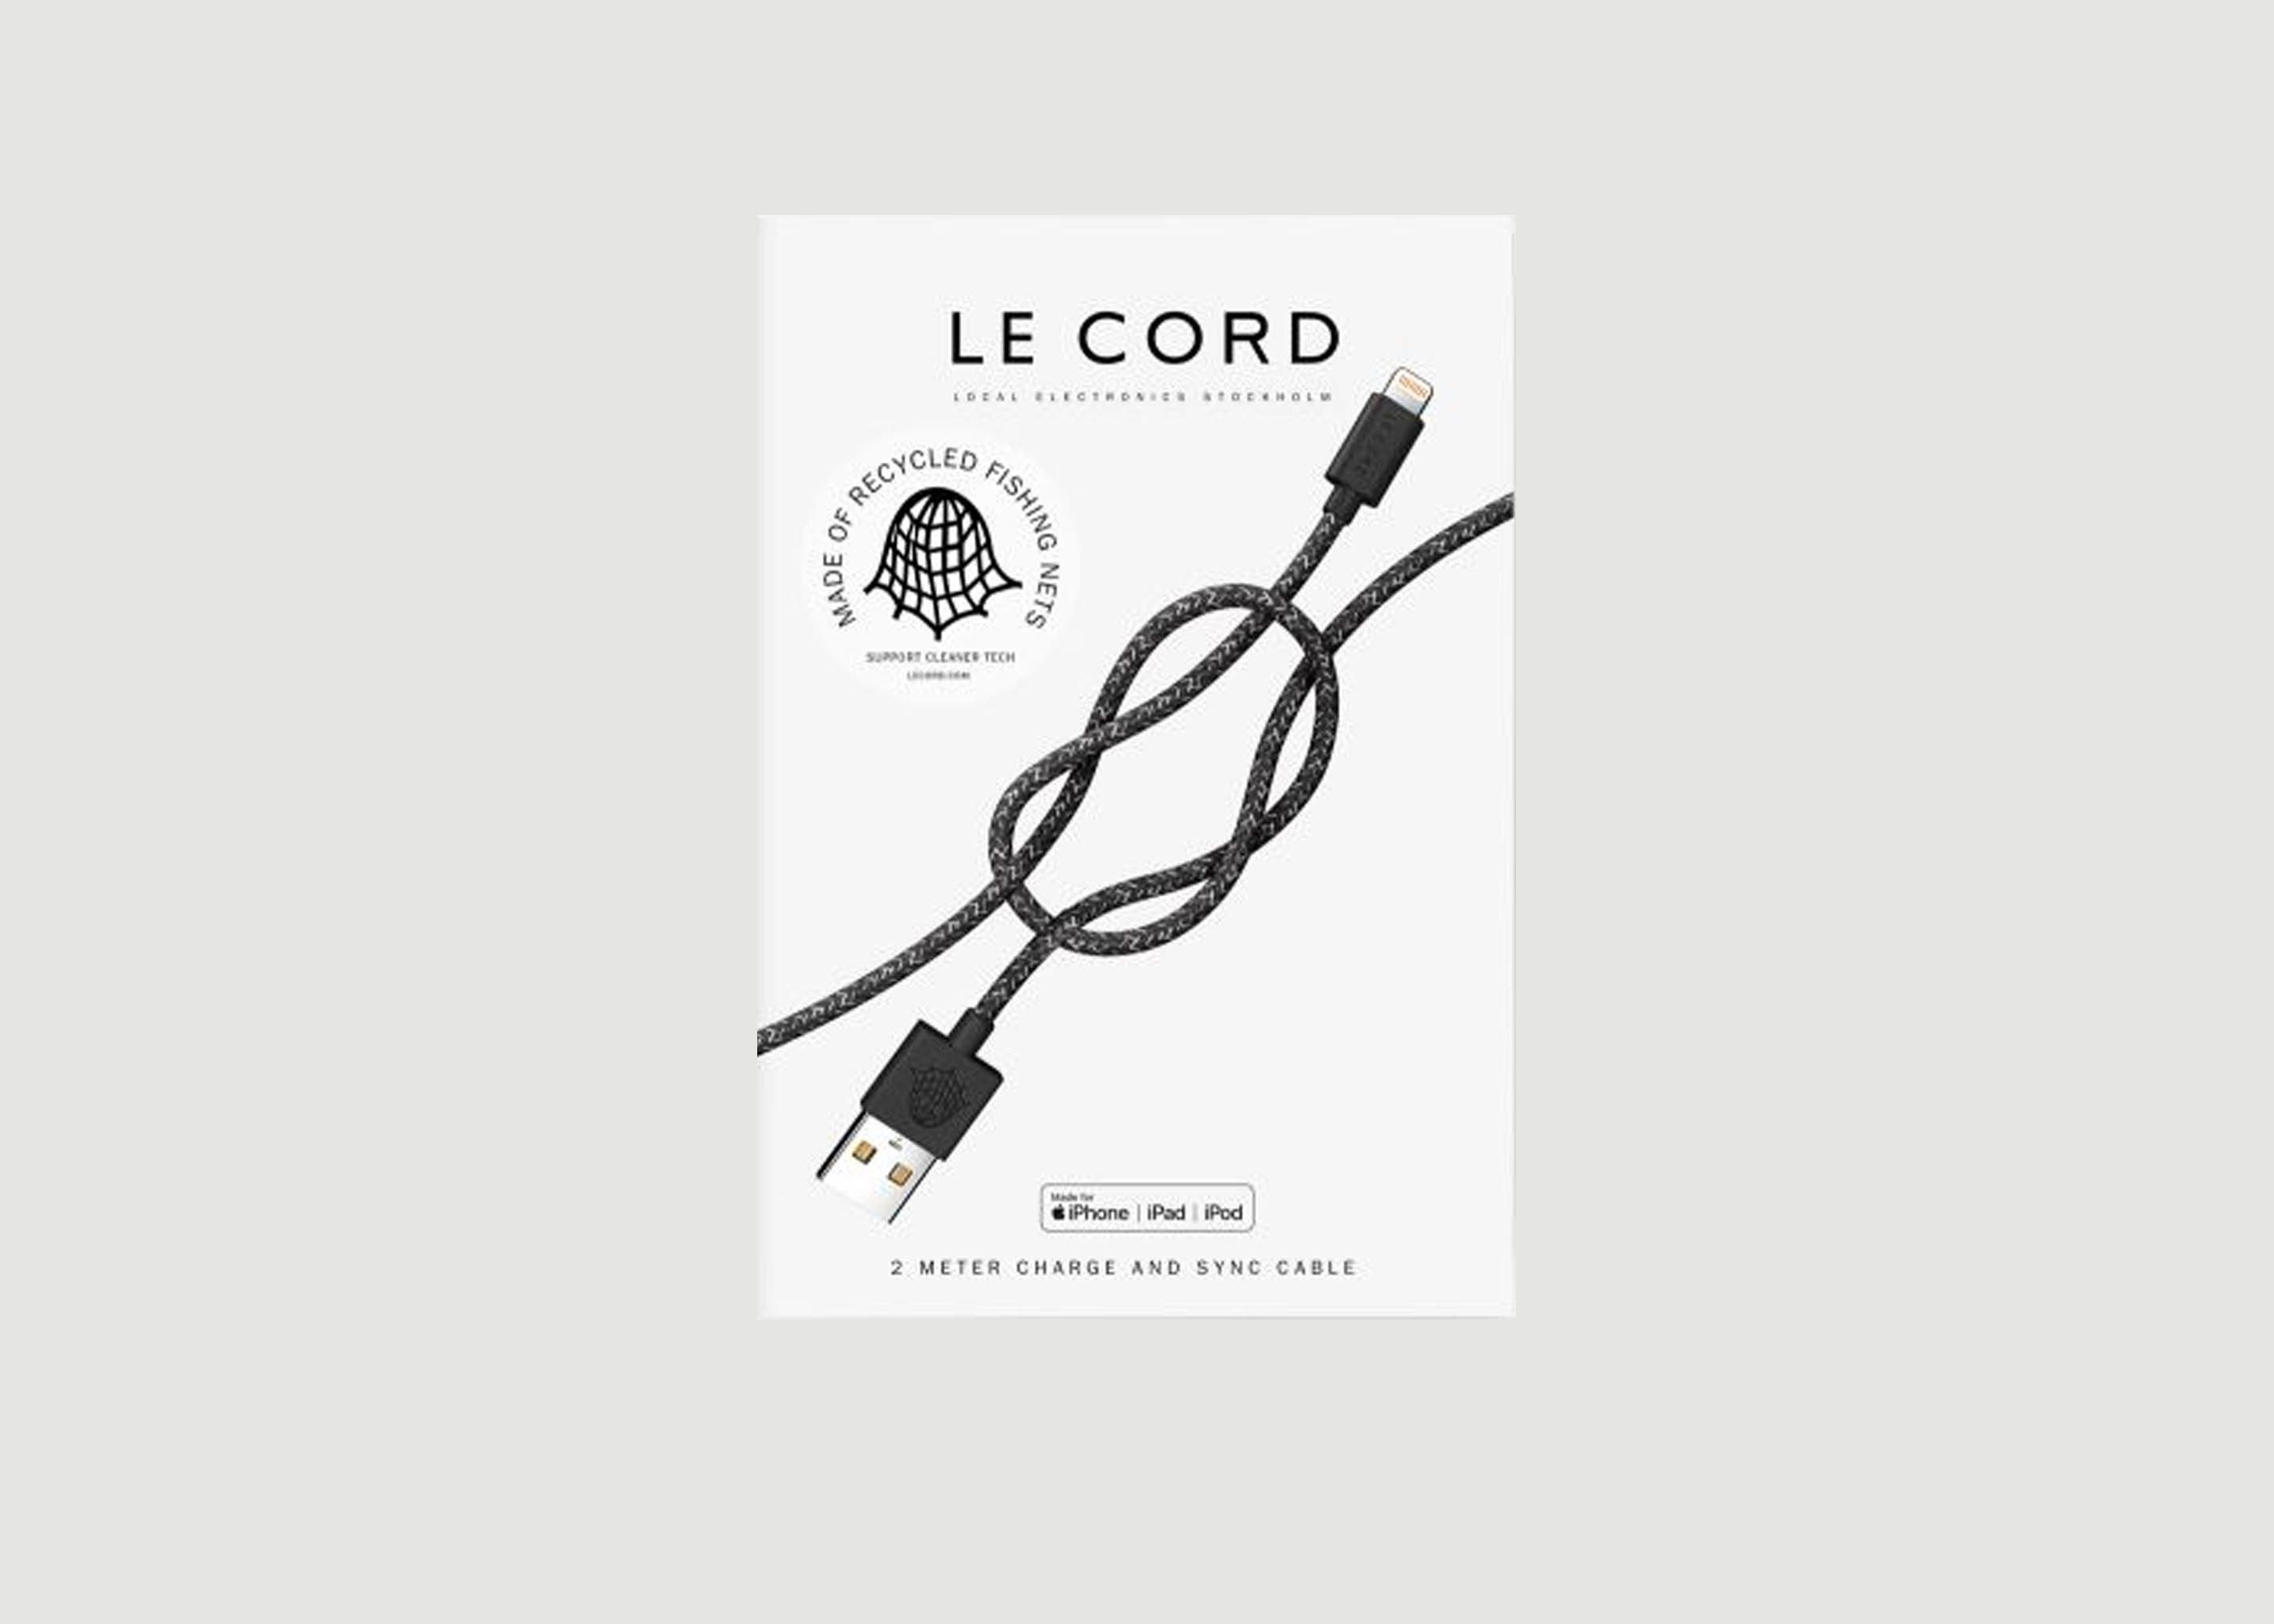 https://media.lexception.com/img/products/le-cord/107362-le-cord-cableusbrecycledcables2meter-01-zoom.jpg